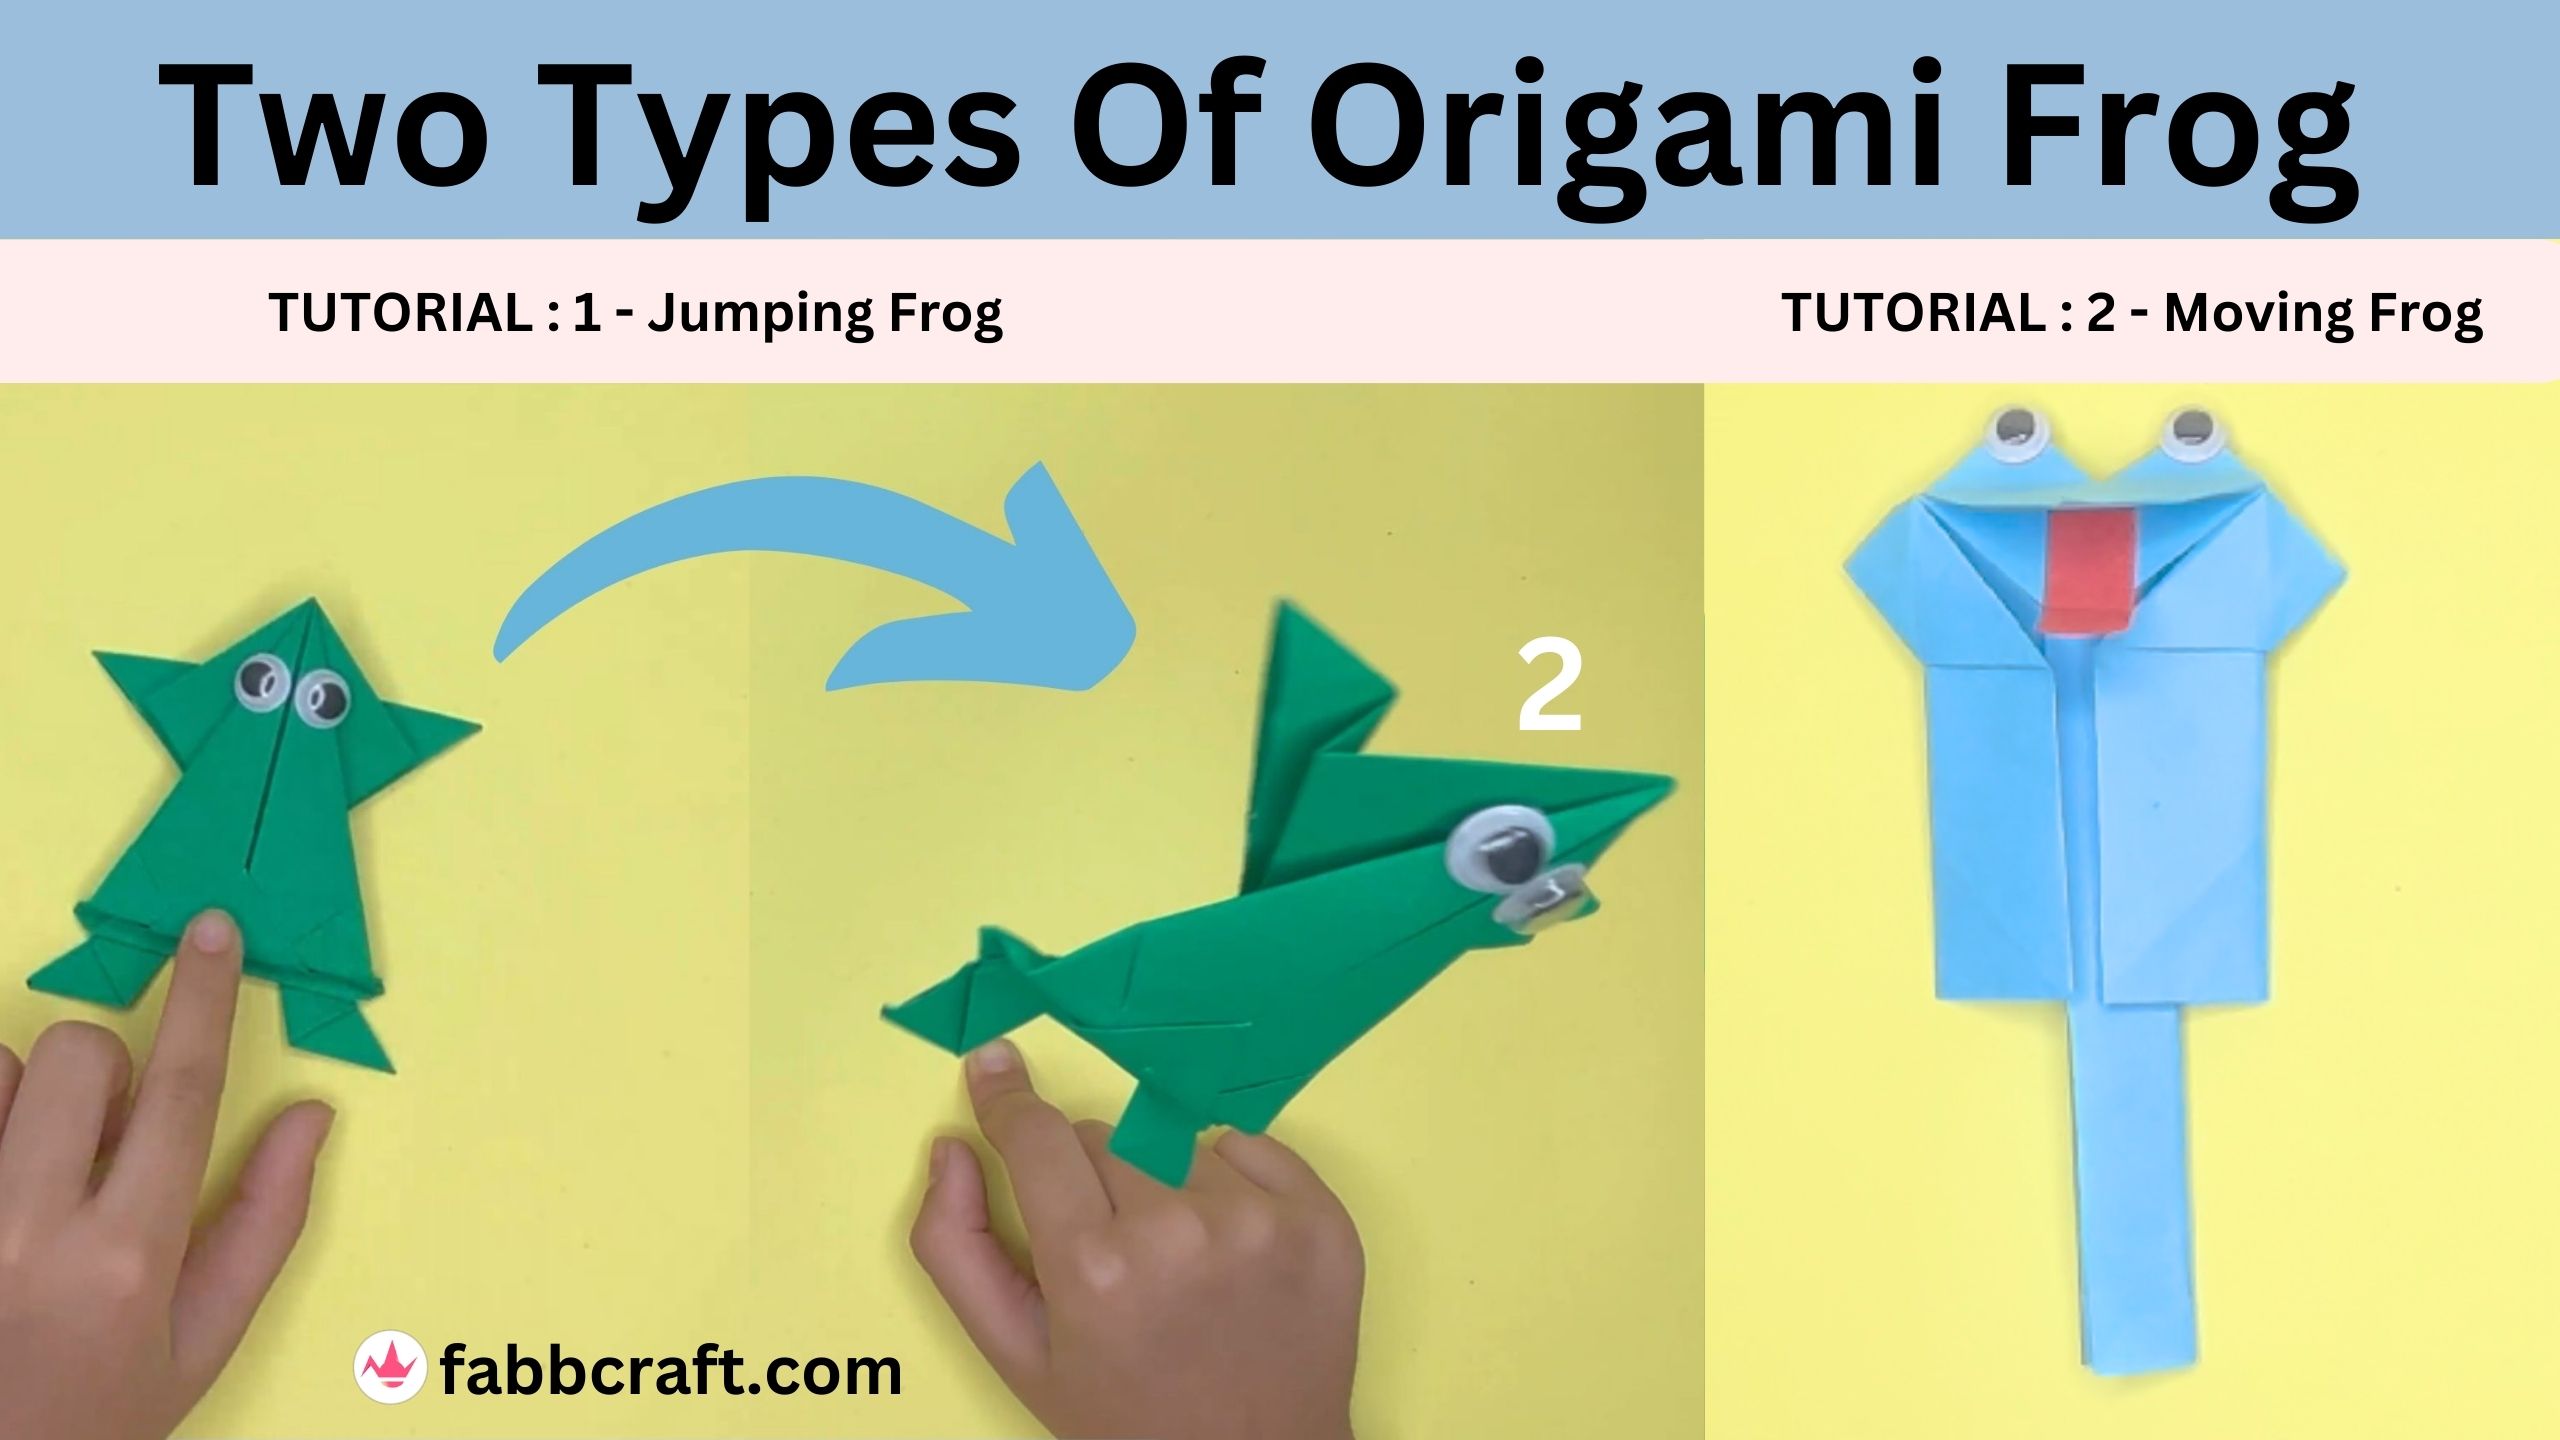 How To Make Origami Frog Step By Step Tutorial Video Fabbcraft 0309